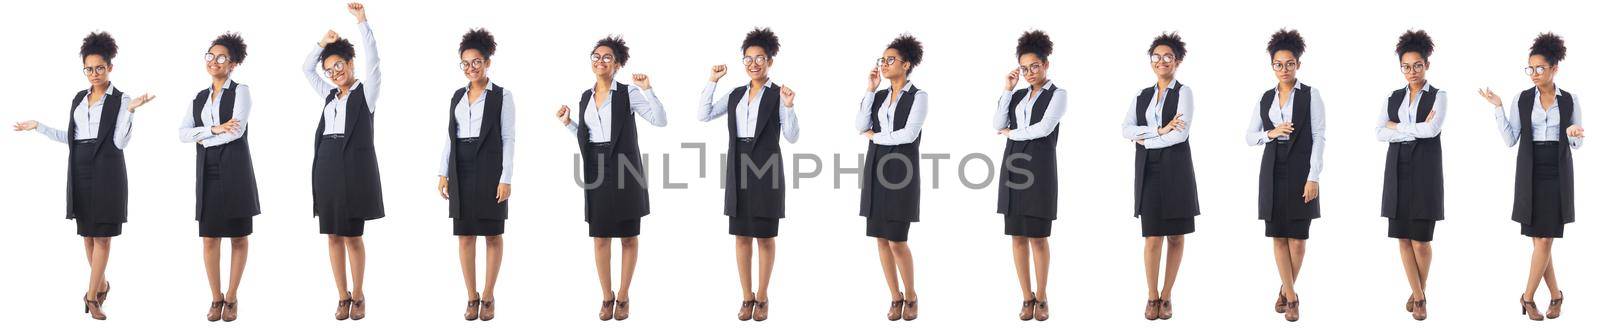 Full length portraits of black woman by ALotOfPeople